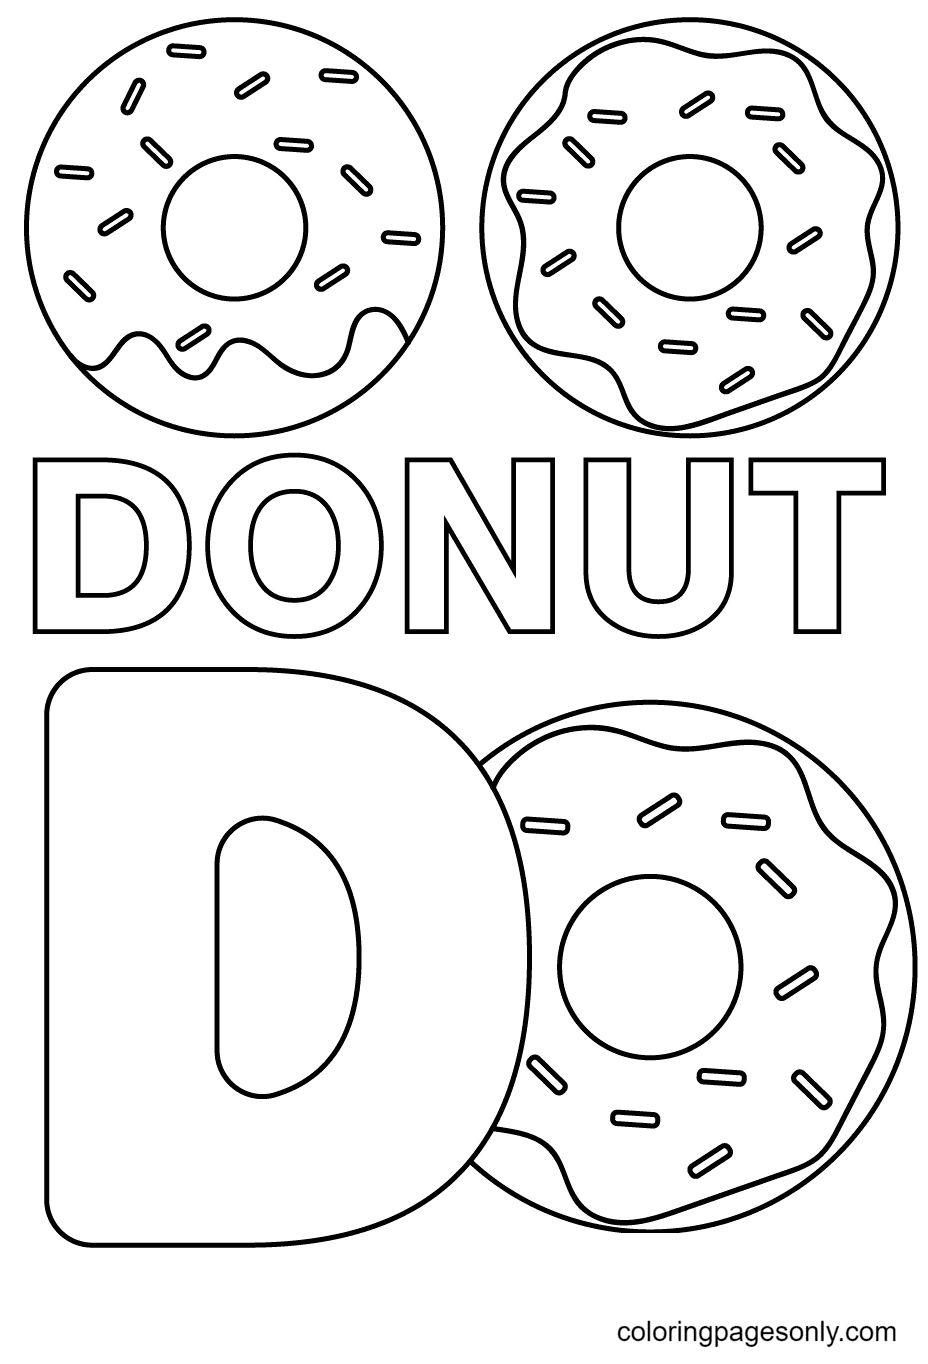 D is for Donut Coloring Pages   Letter D Coloring Pages   Coloring ...